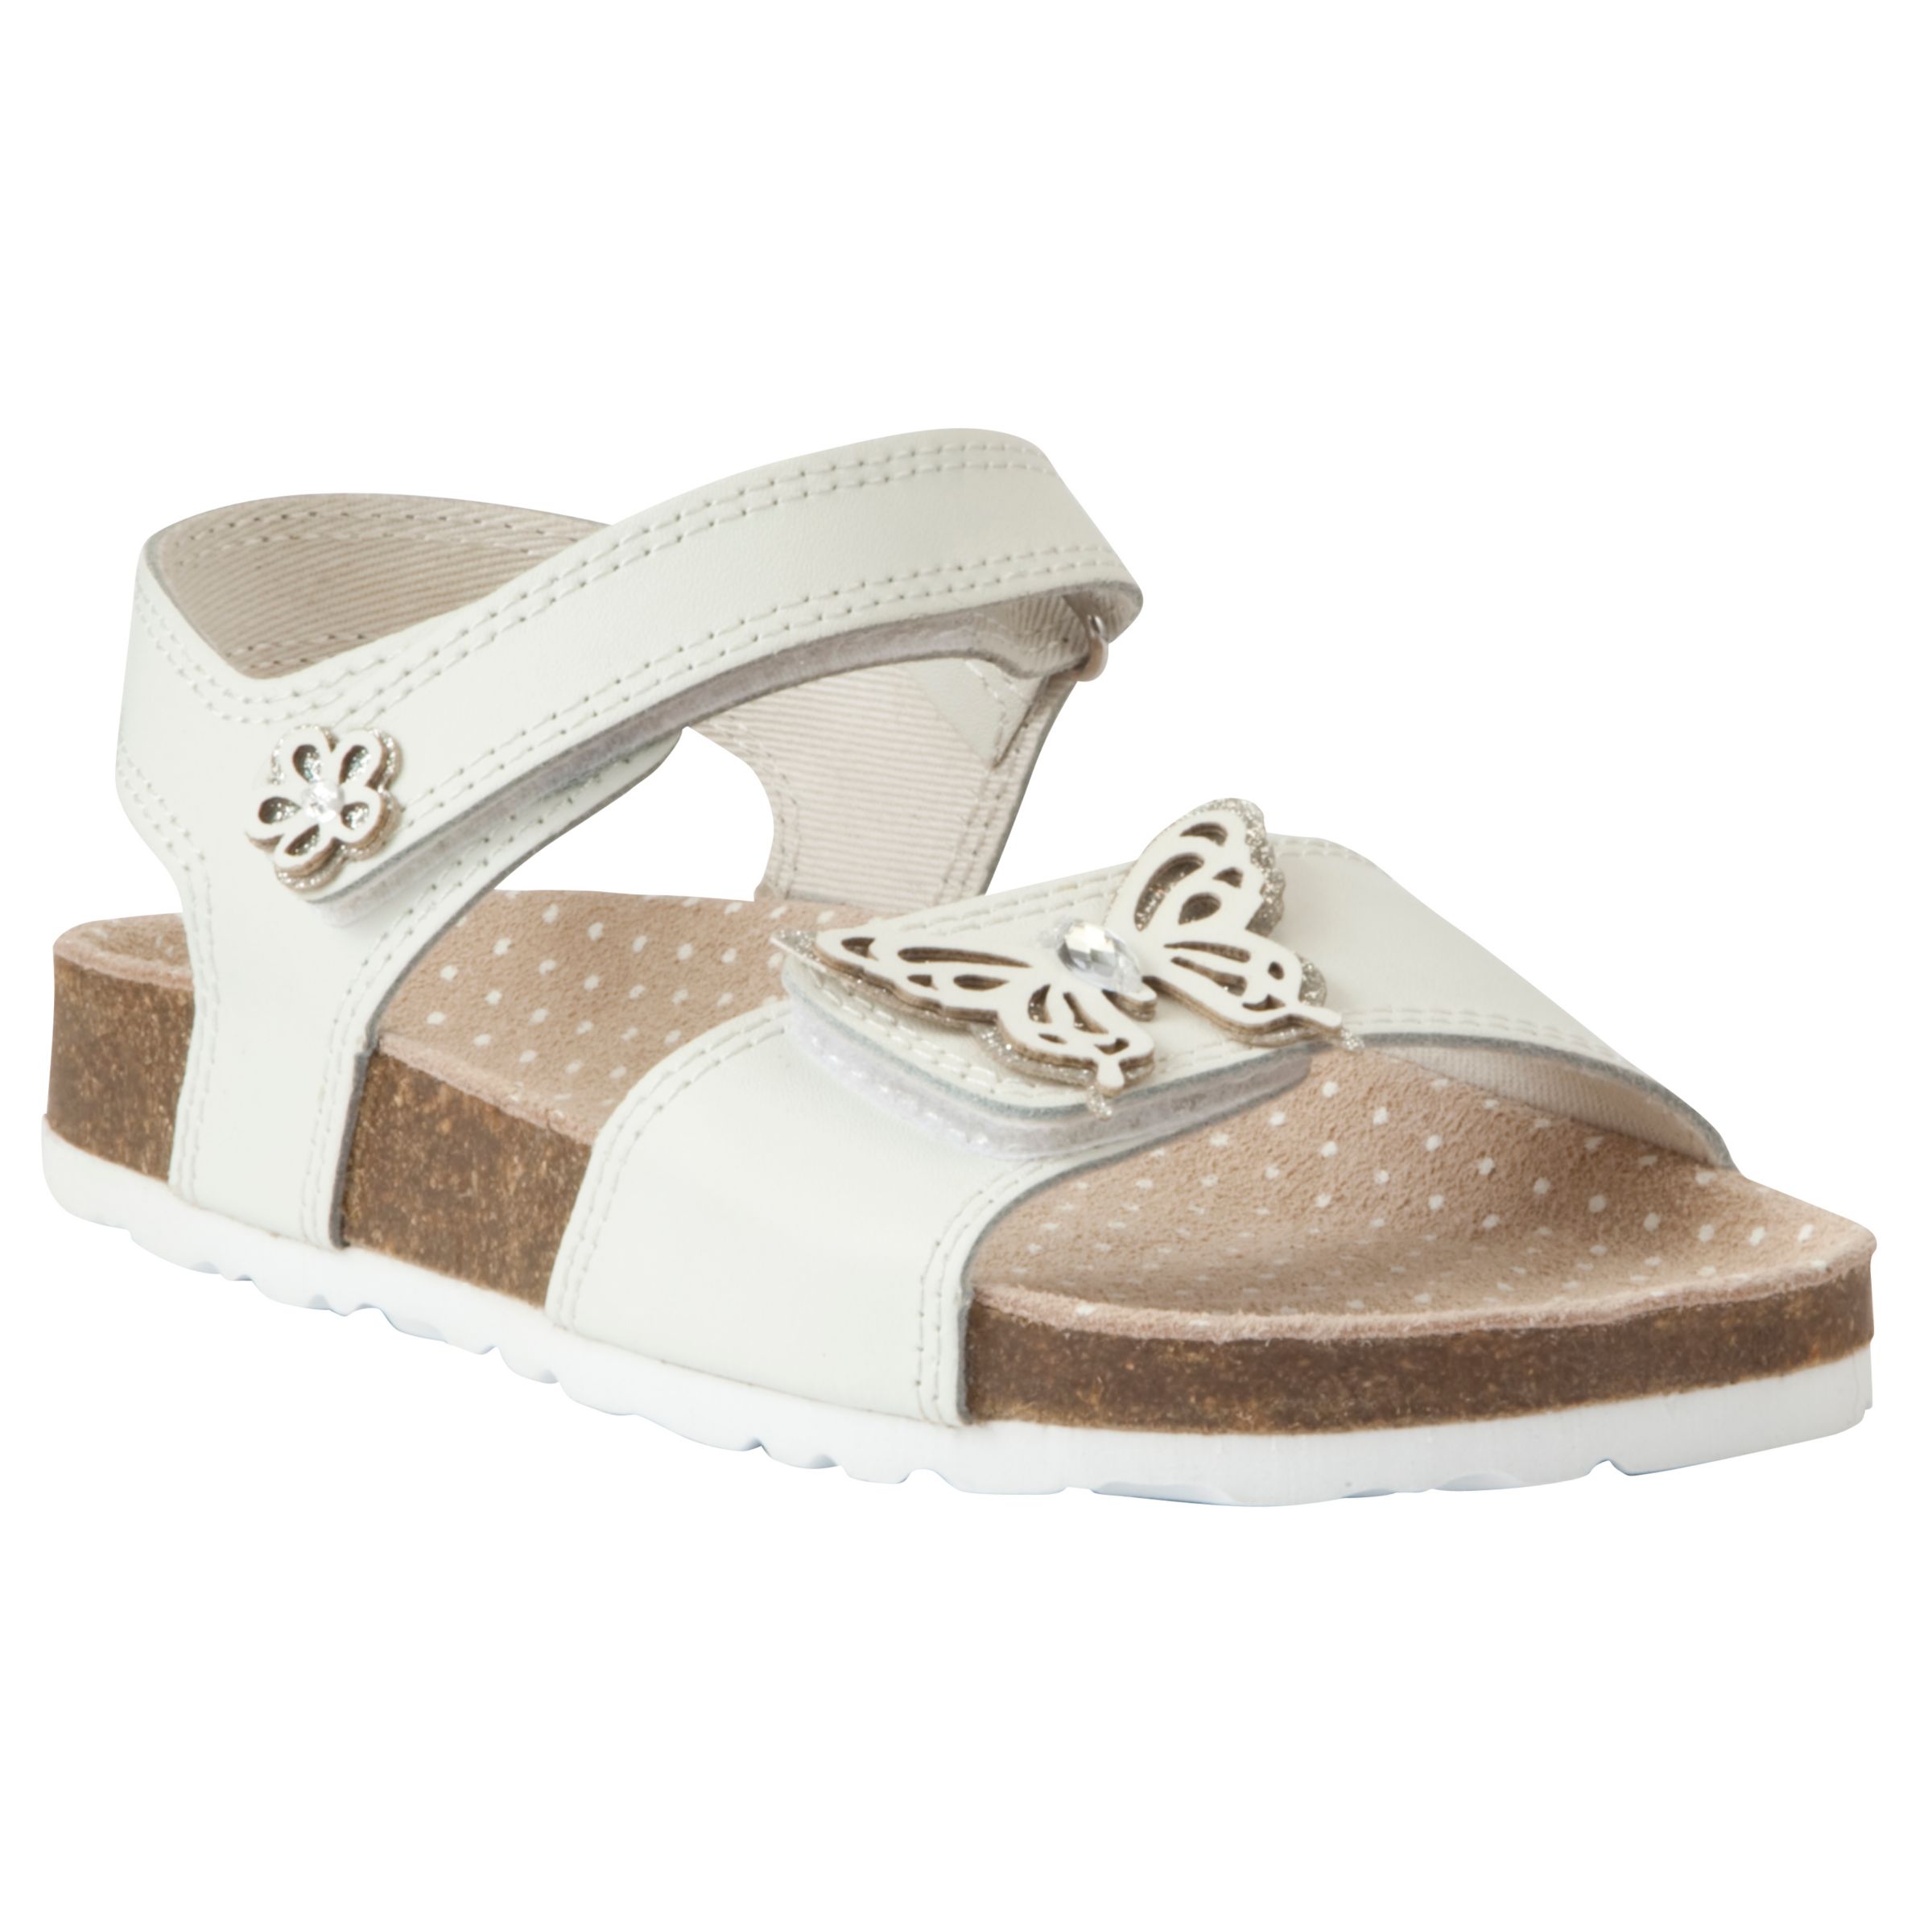 Buy John Lewis Girl Oriole Butterfly Sandals, White Online at johnlewis.com